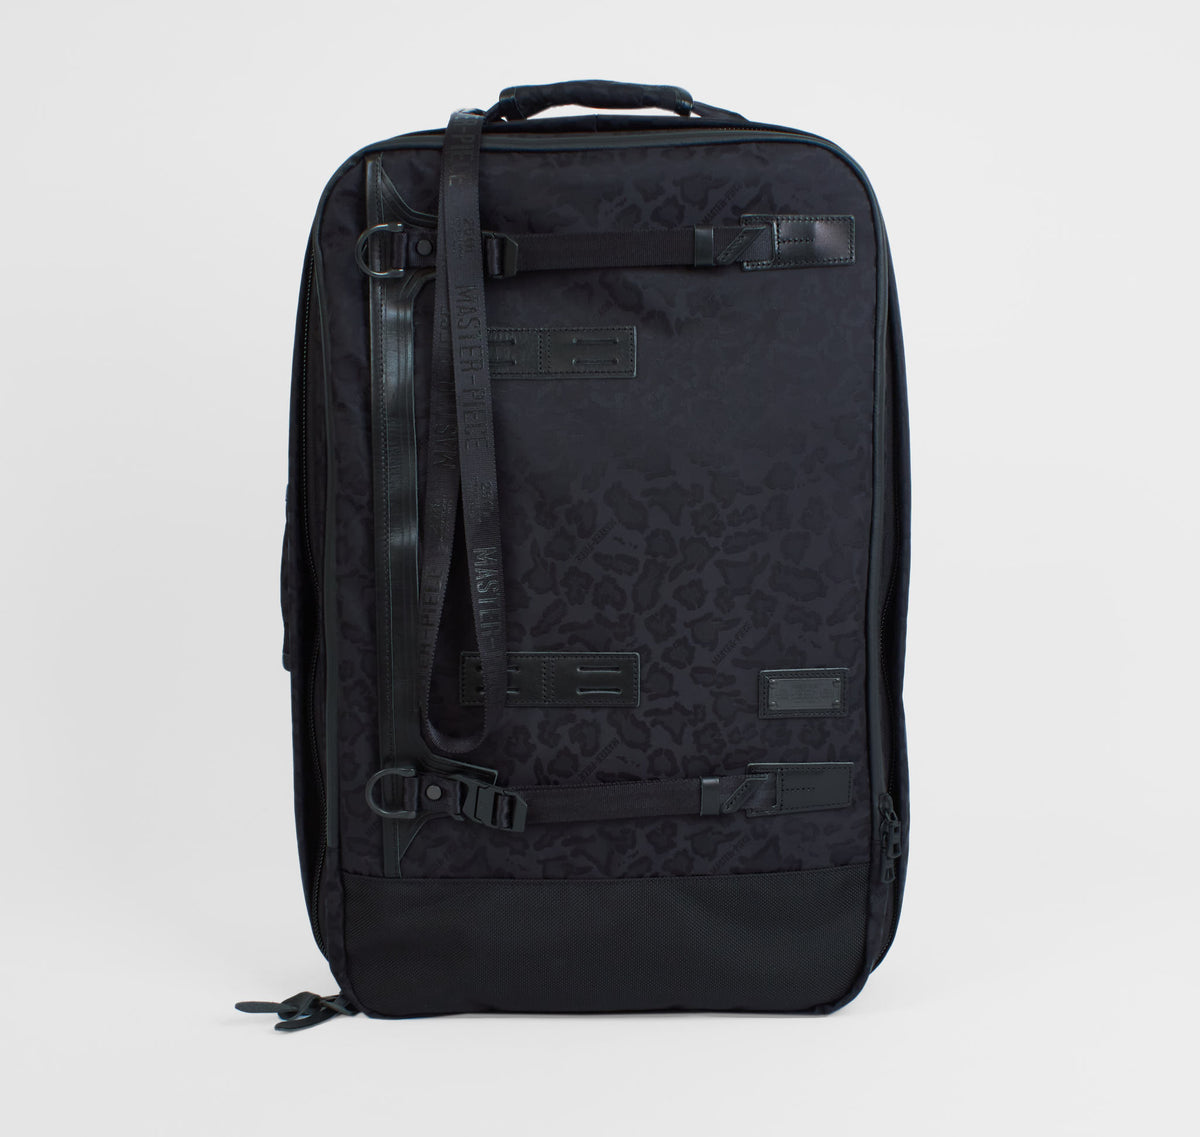 Master-Piece Large Backpack Suitcase 25th Anniversary